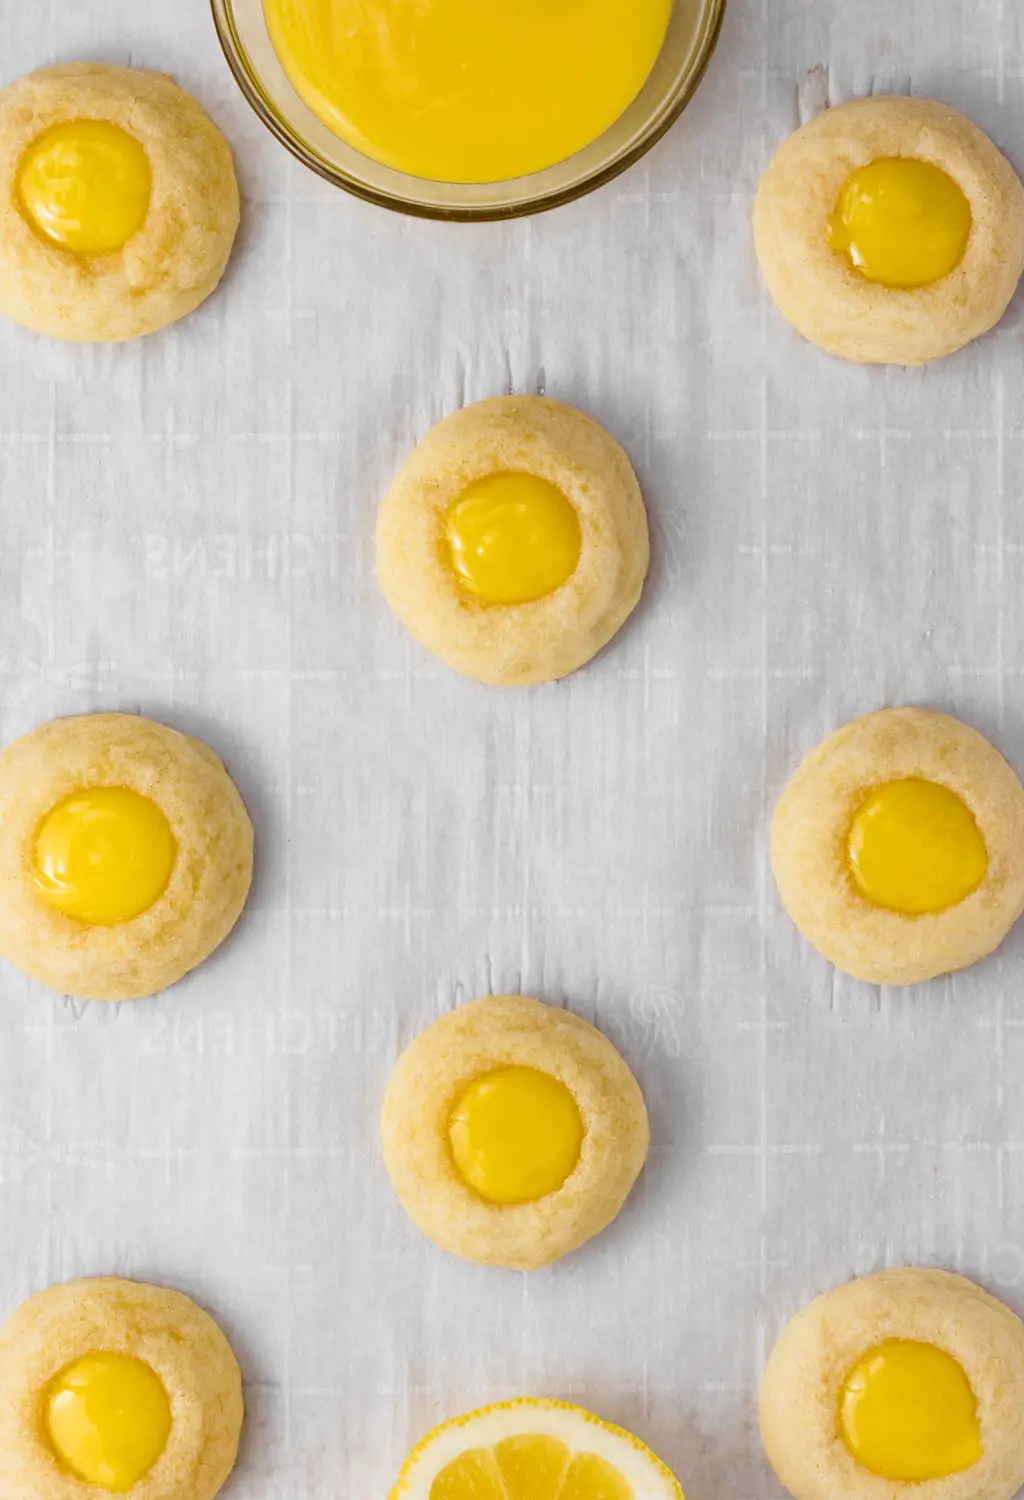 Filling cookies with lemon curd